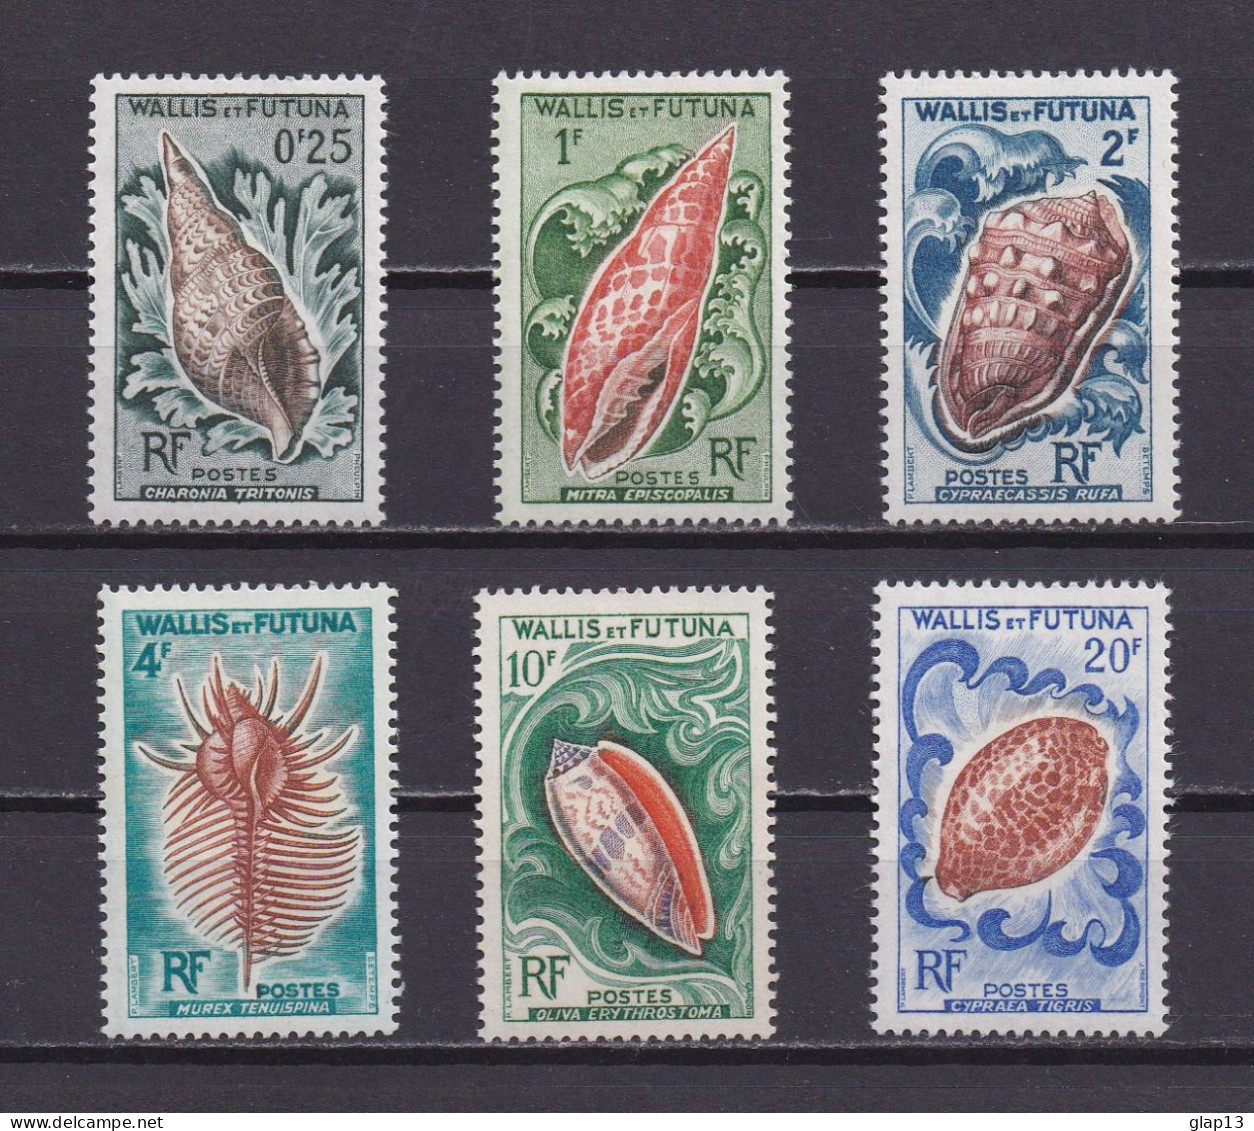 WALLIS ET FUTUNA 1962 TIMBRE N°162/67 NEUF AVEC CHARNIERE COQUILLAGES - Nuovi